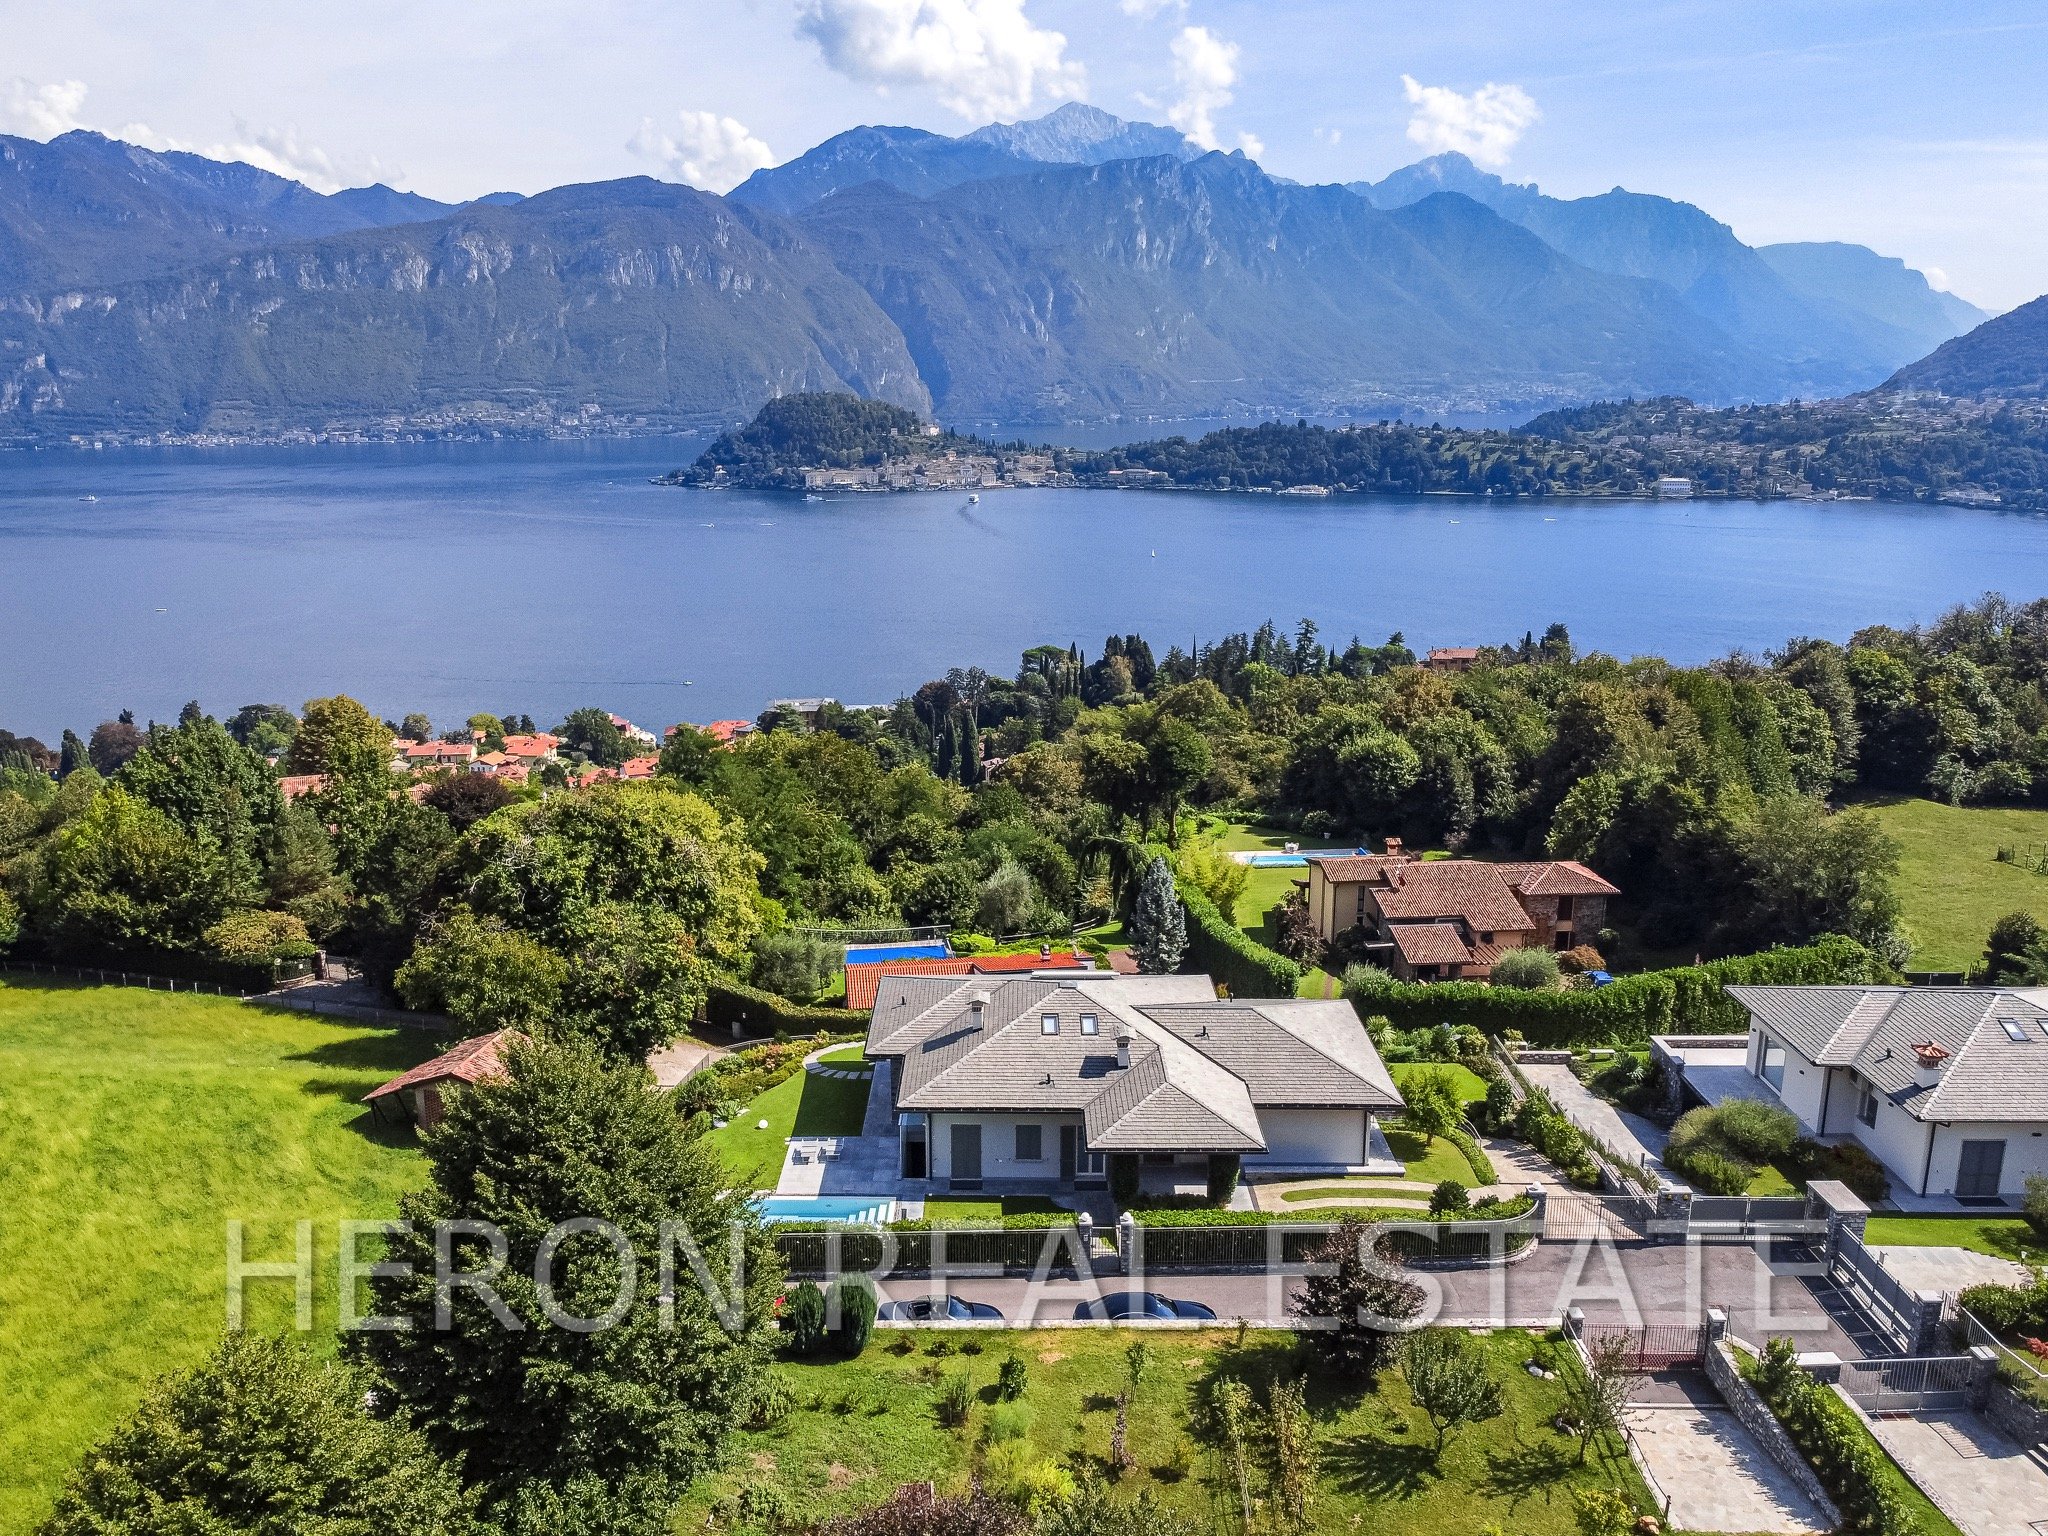 Villa with lake view Griante sale.jpg